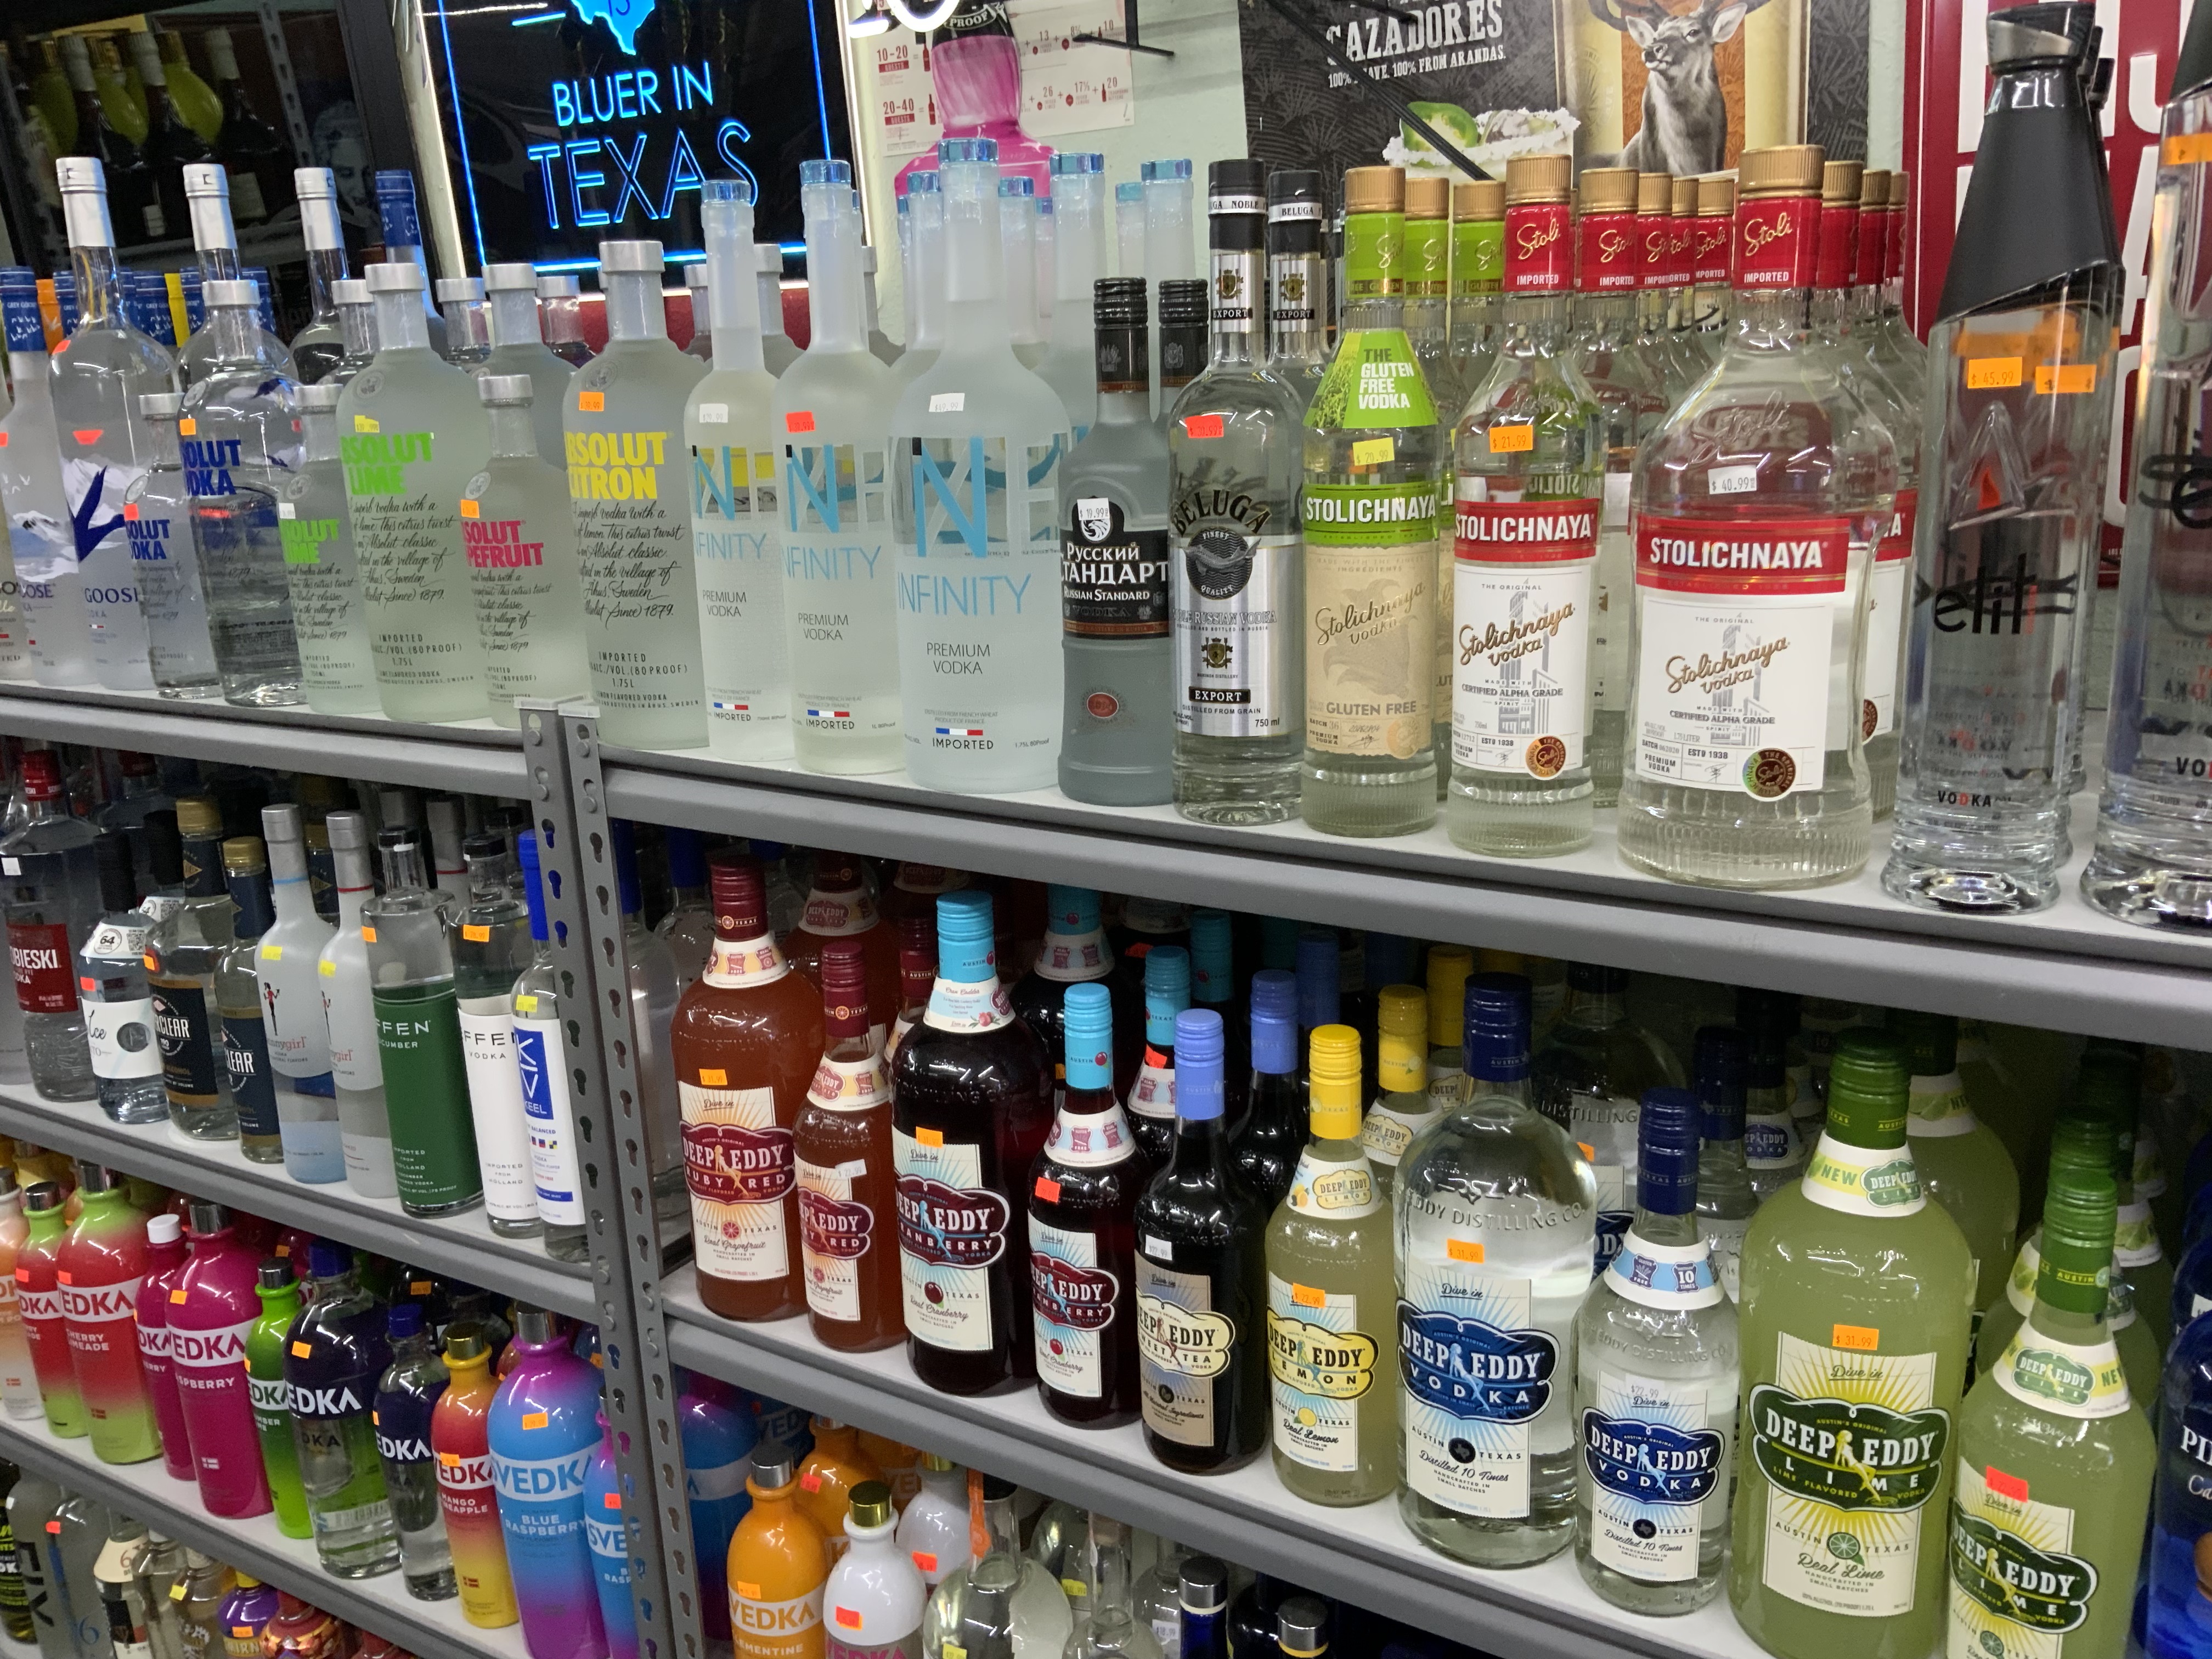 Established Liquor Store for sale in TX